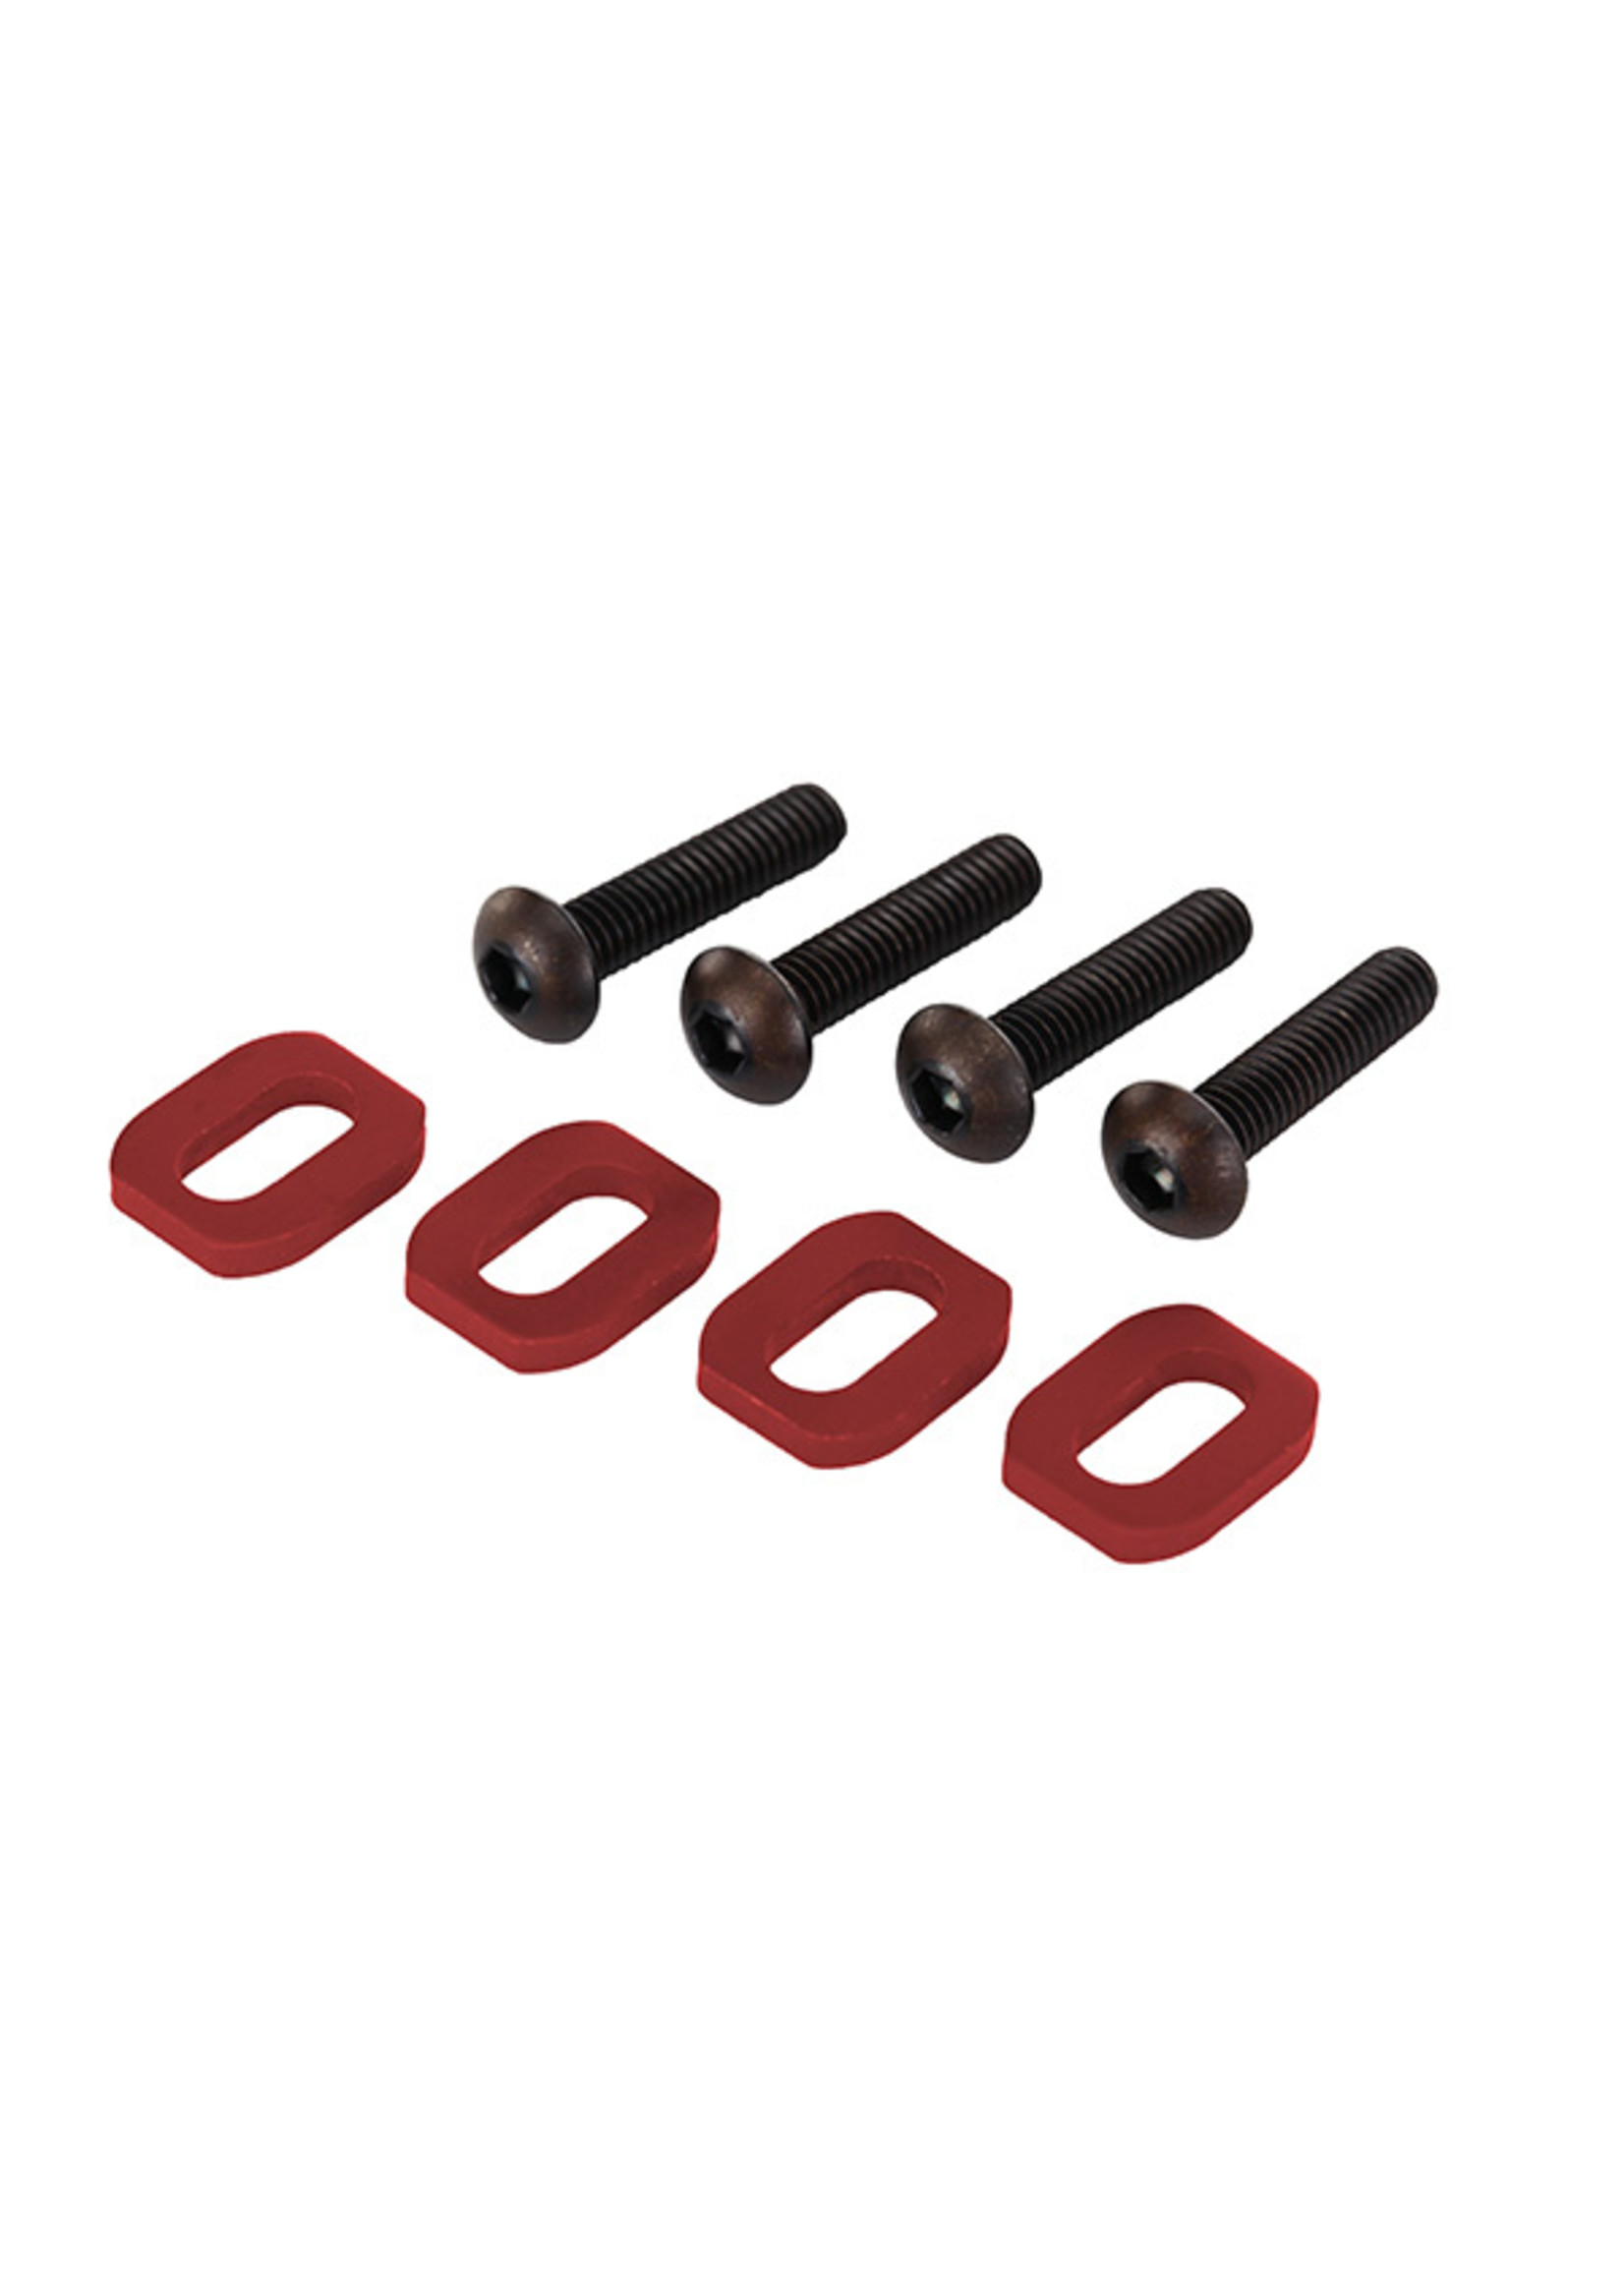 Traxxas 7759R - Aluminum Motor Mount Washers - Red